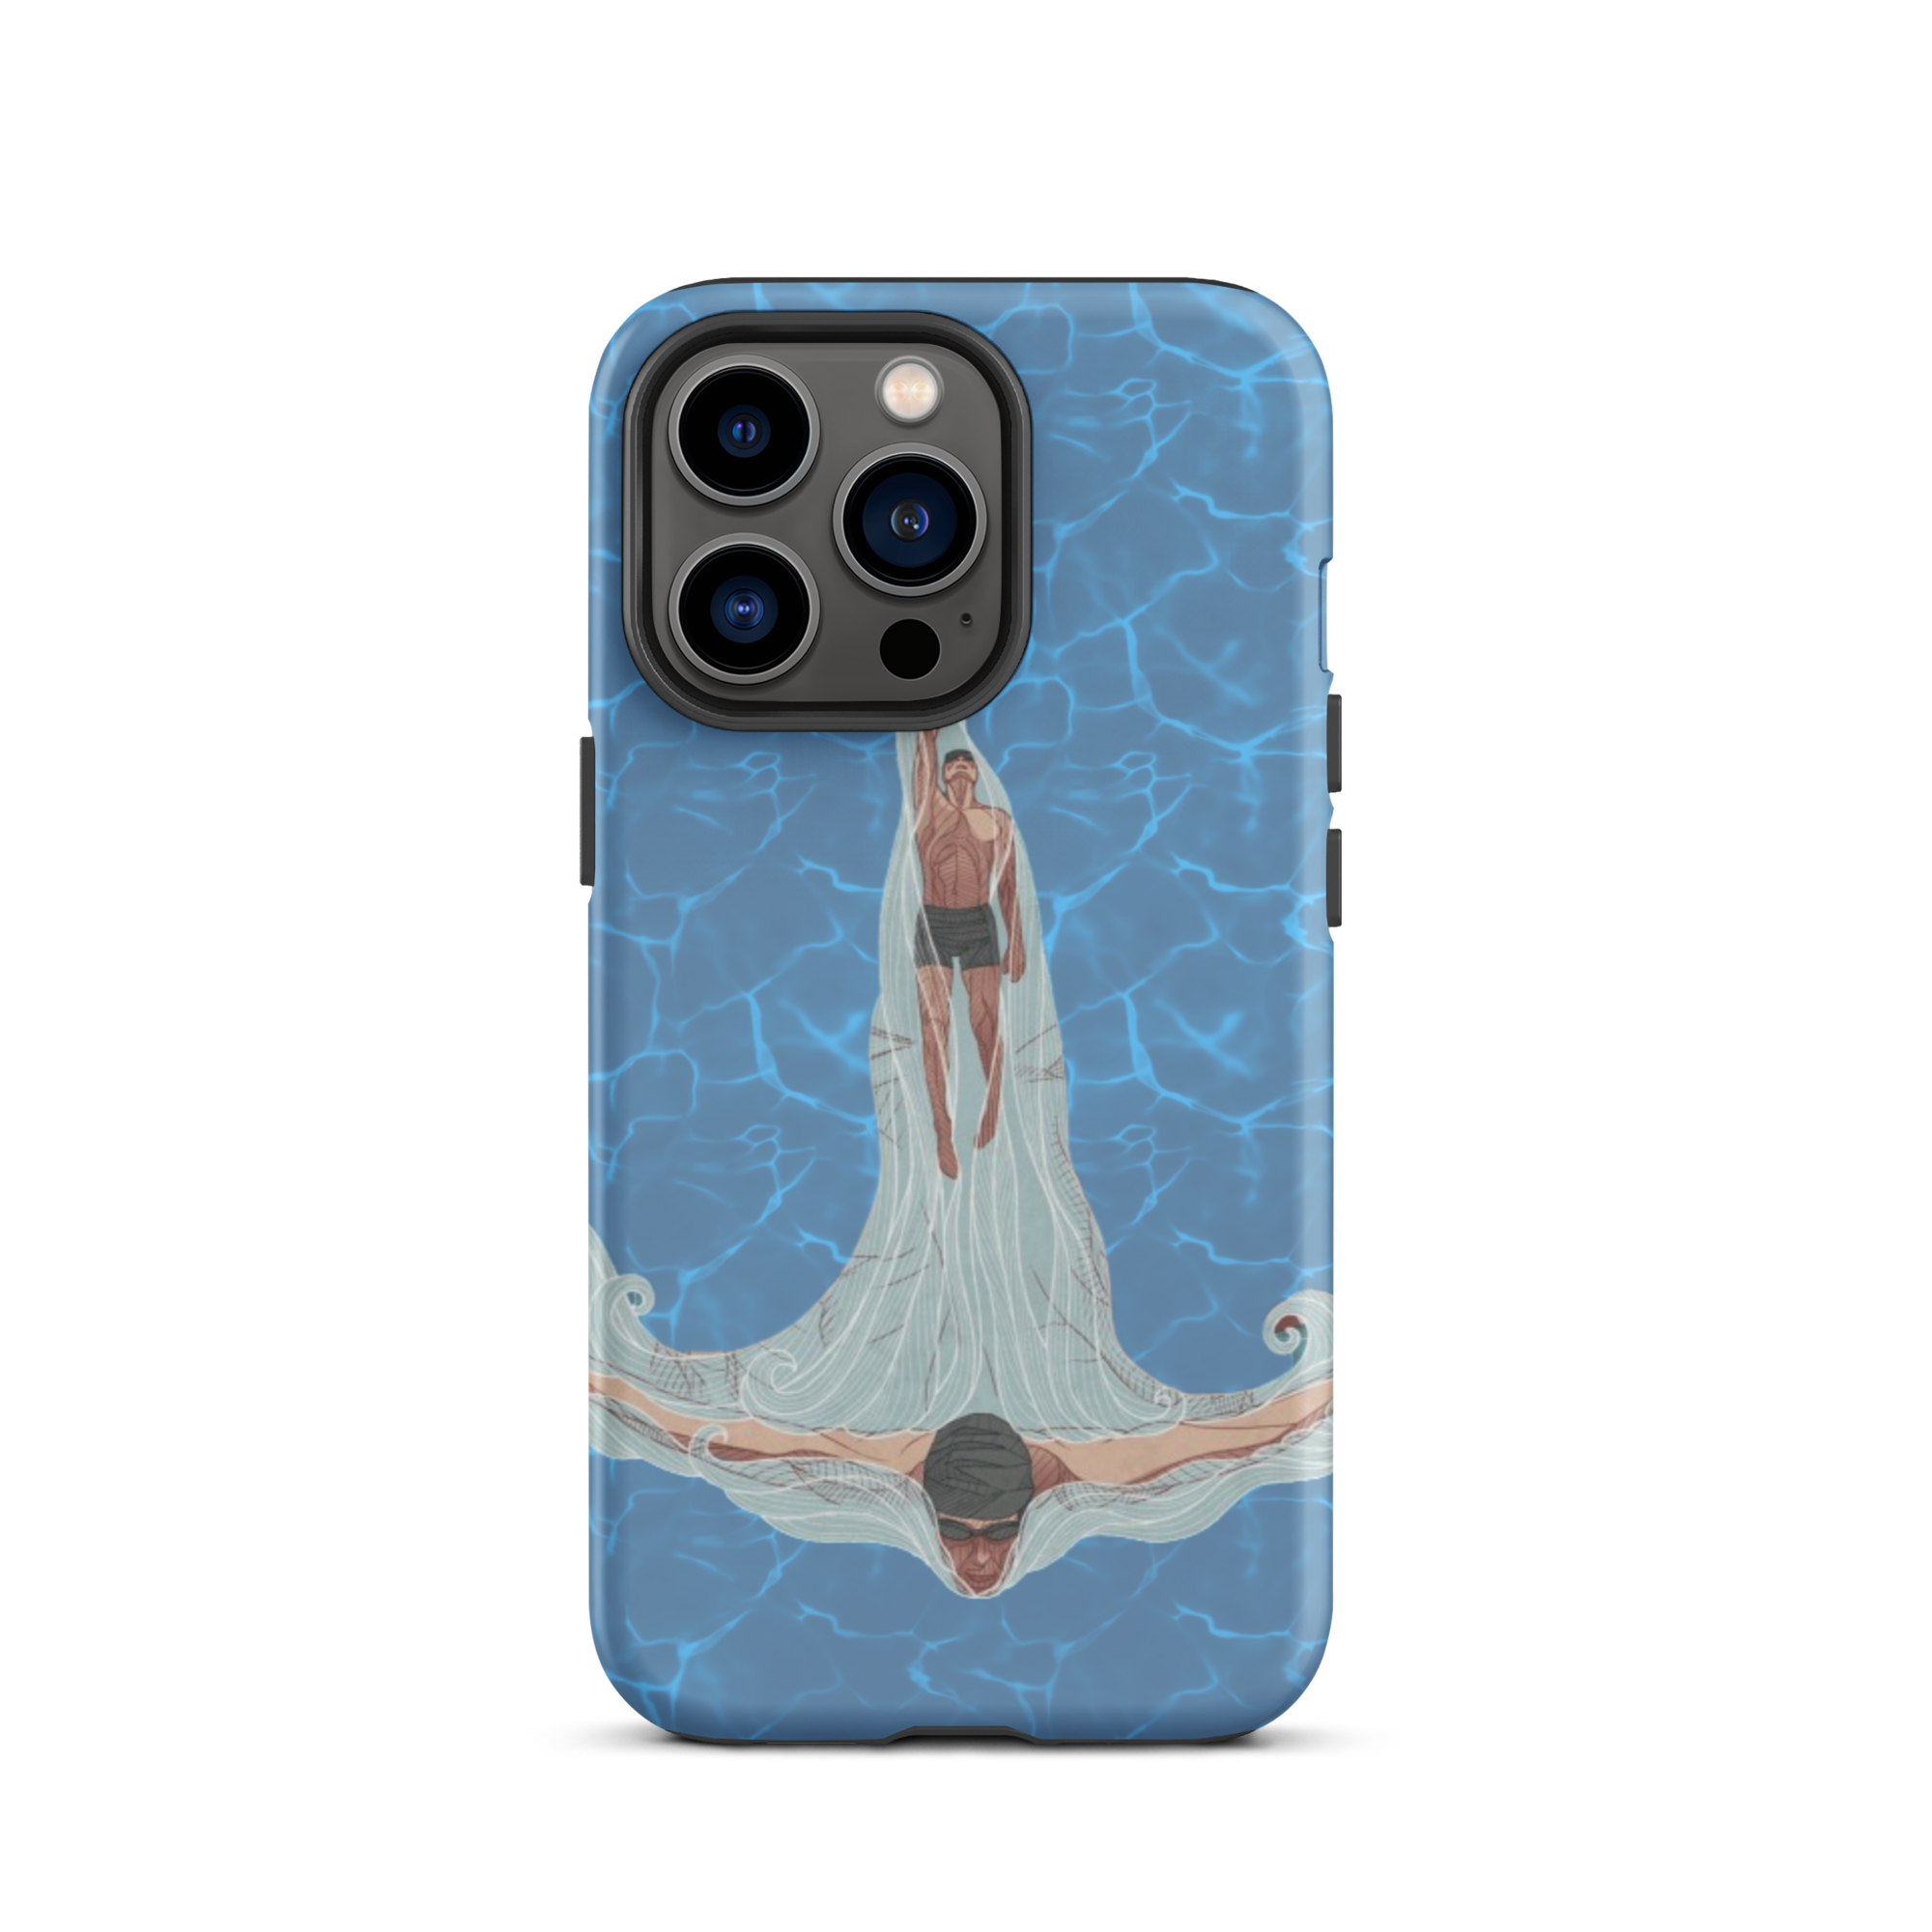 Butterfly Swimmer Tough iPhone case